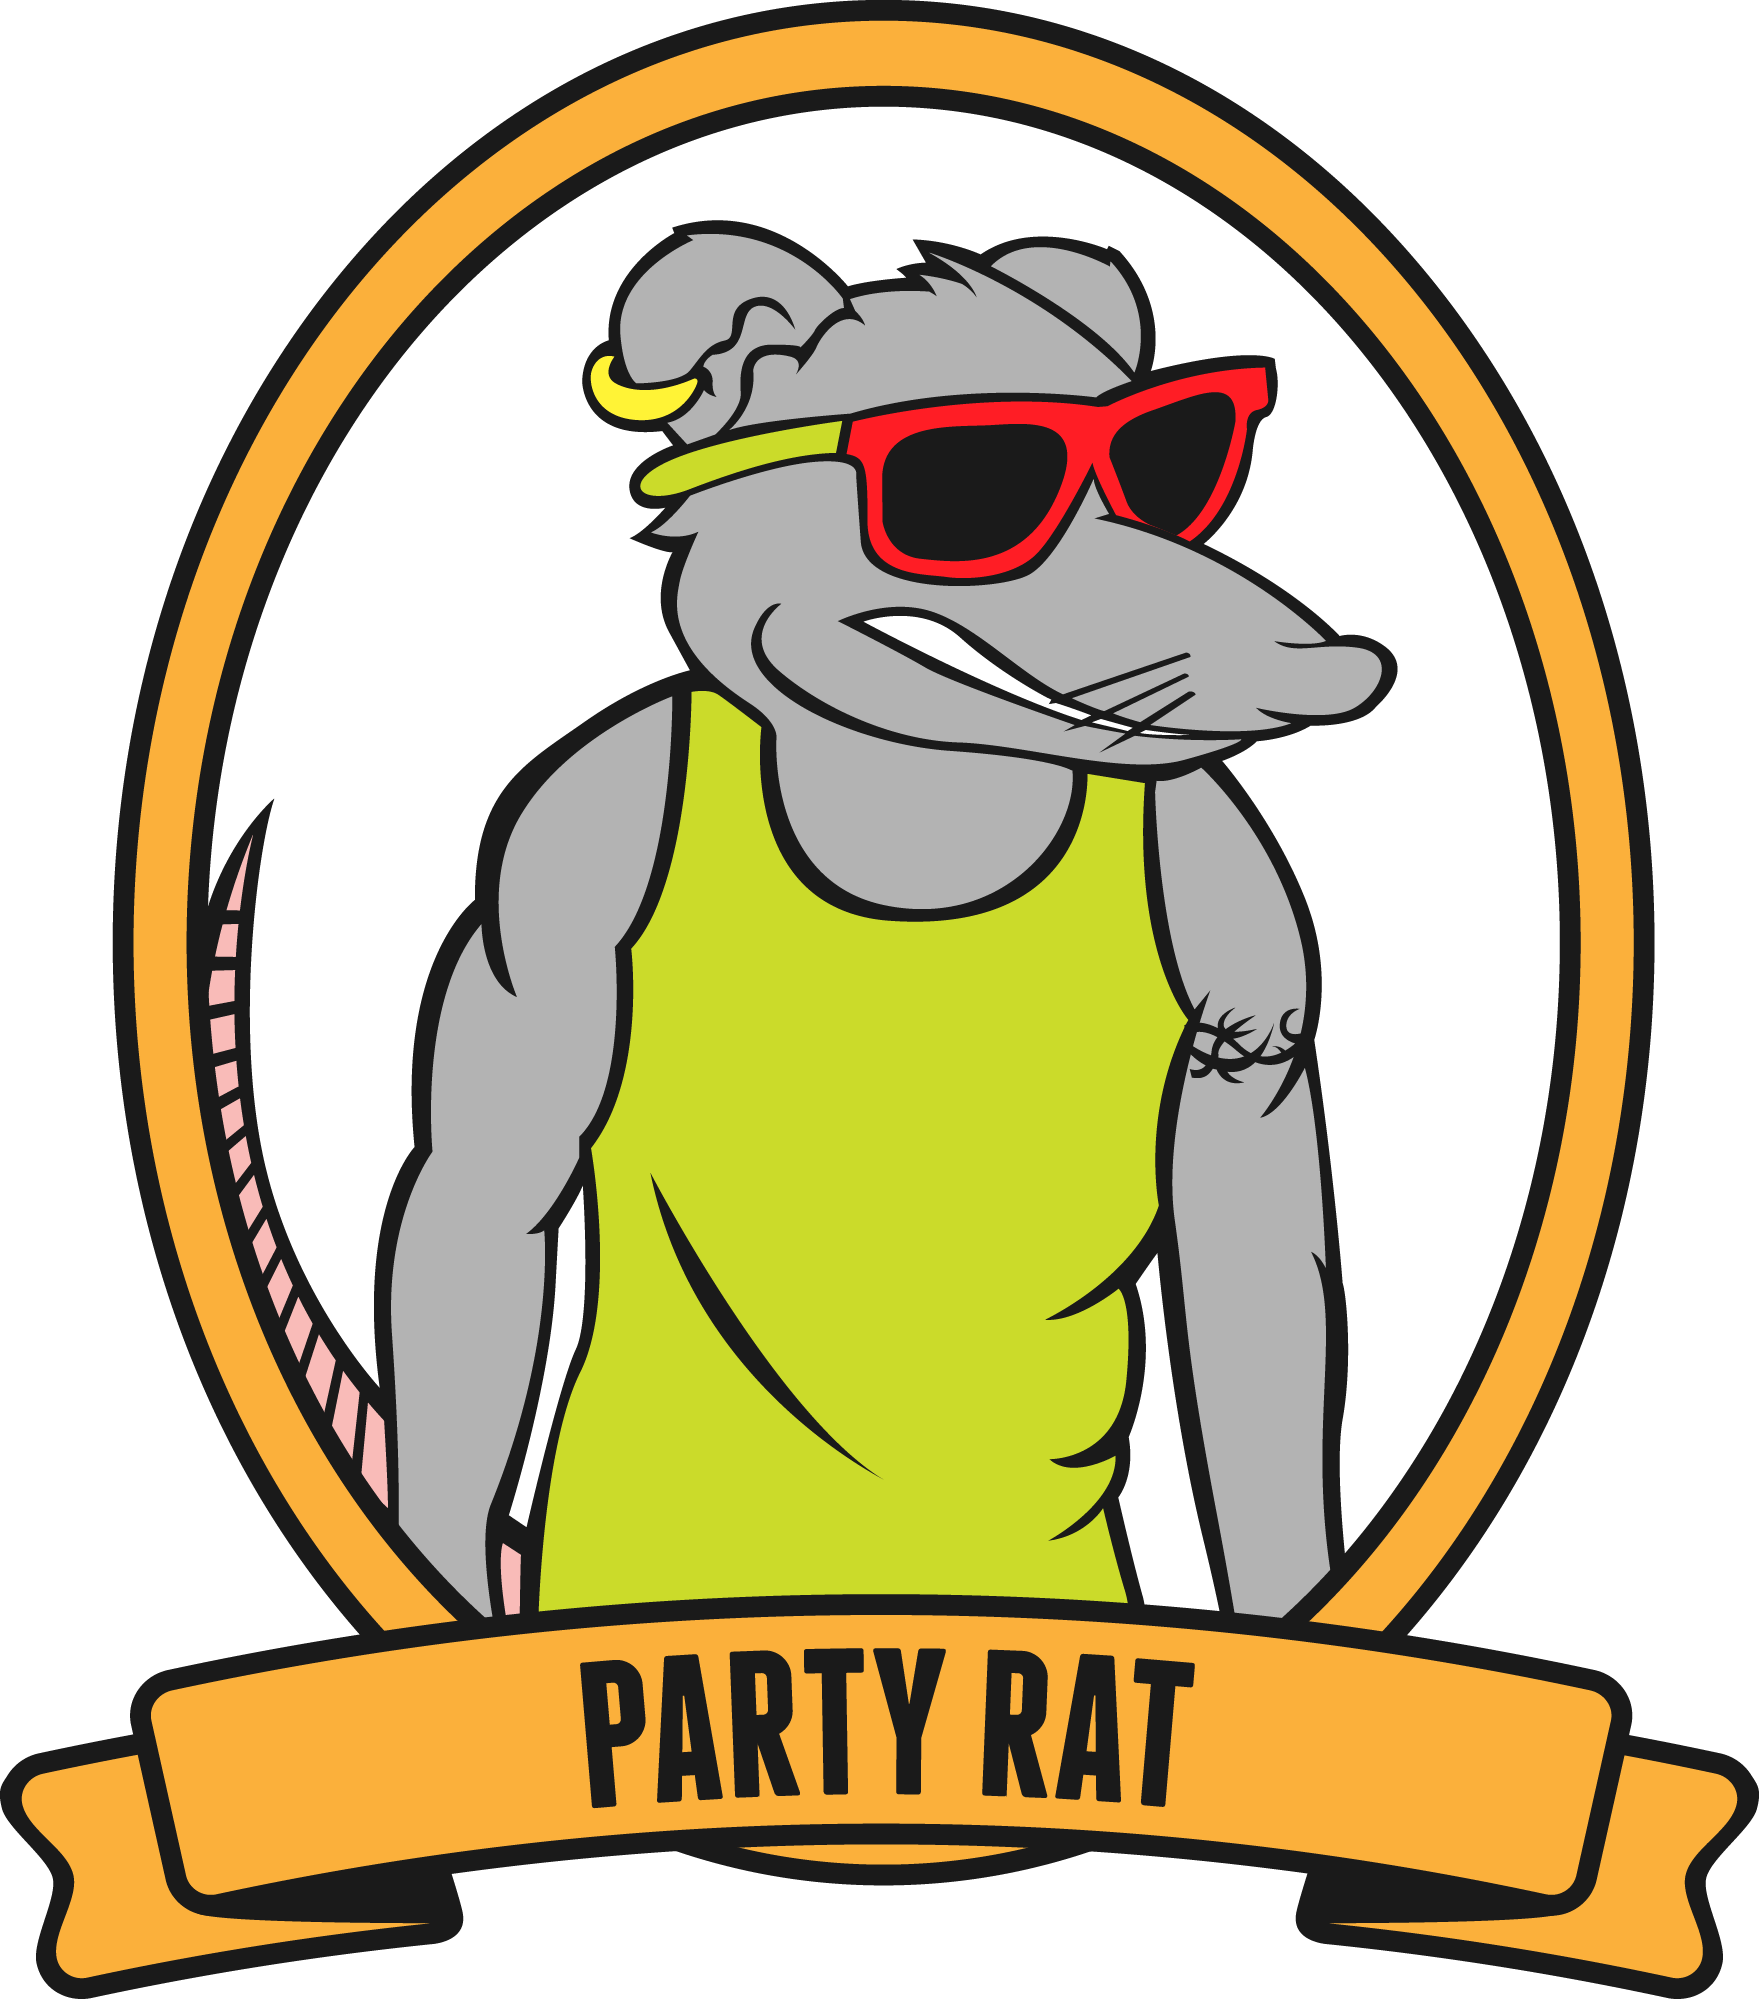 Social Drinking Is At The Core Of His Being - Rats Beer (1759x1999)